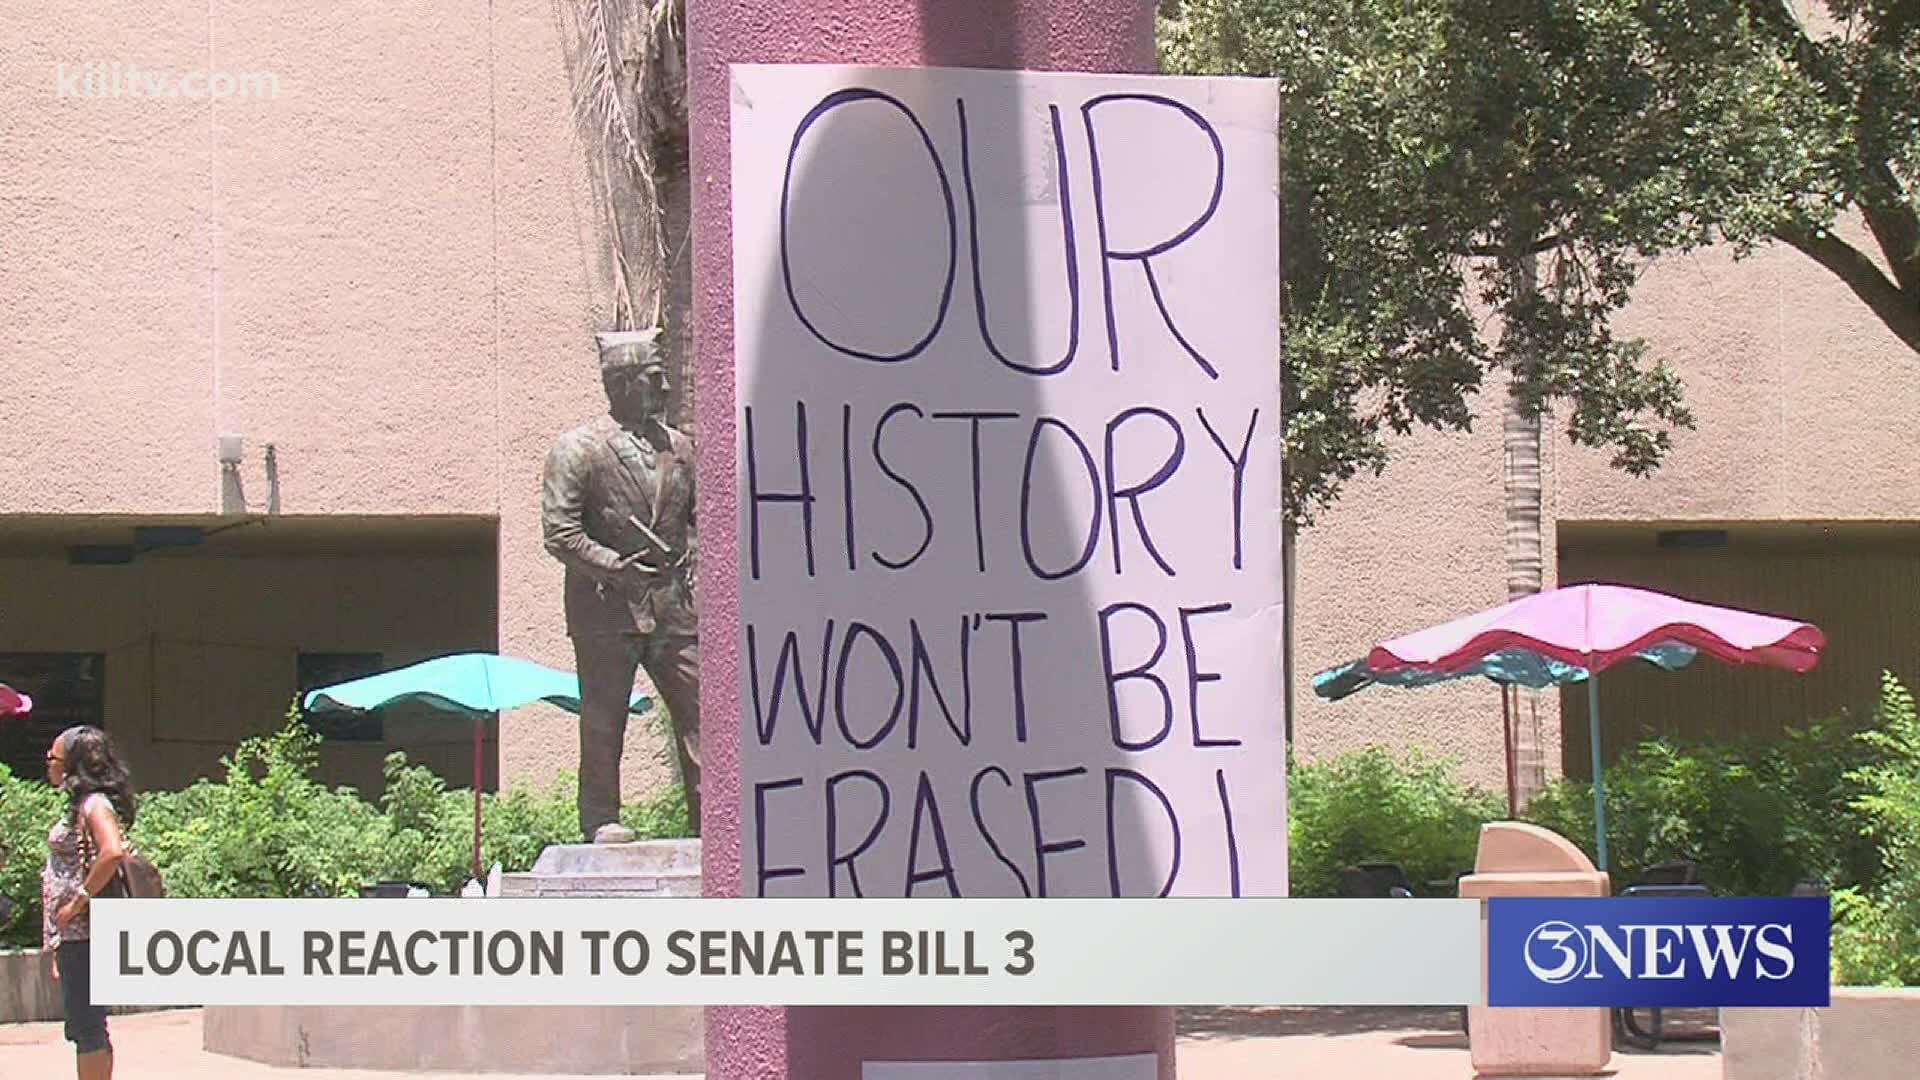 Saturday a large group gathered on the campus of Texas A&M Corpus Christi at the Hector P. Garcia plaza to voice their opposition to the bill.